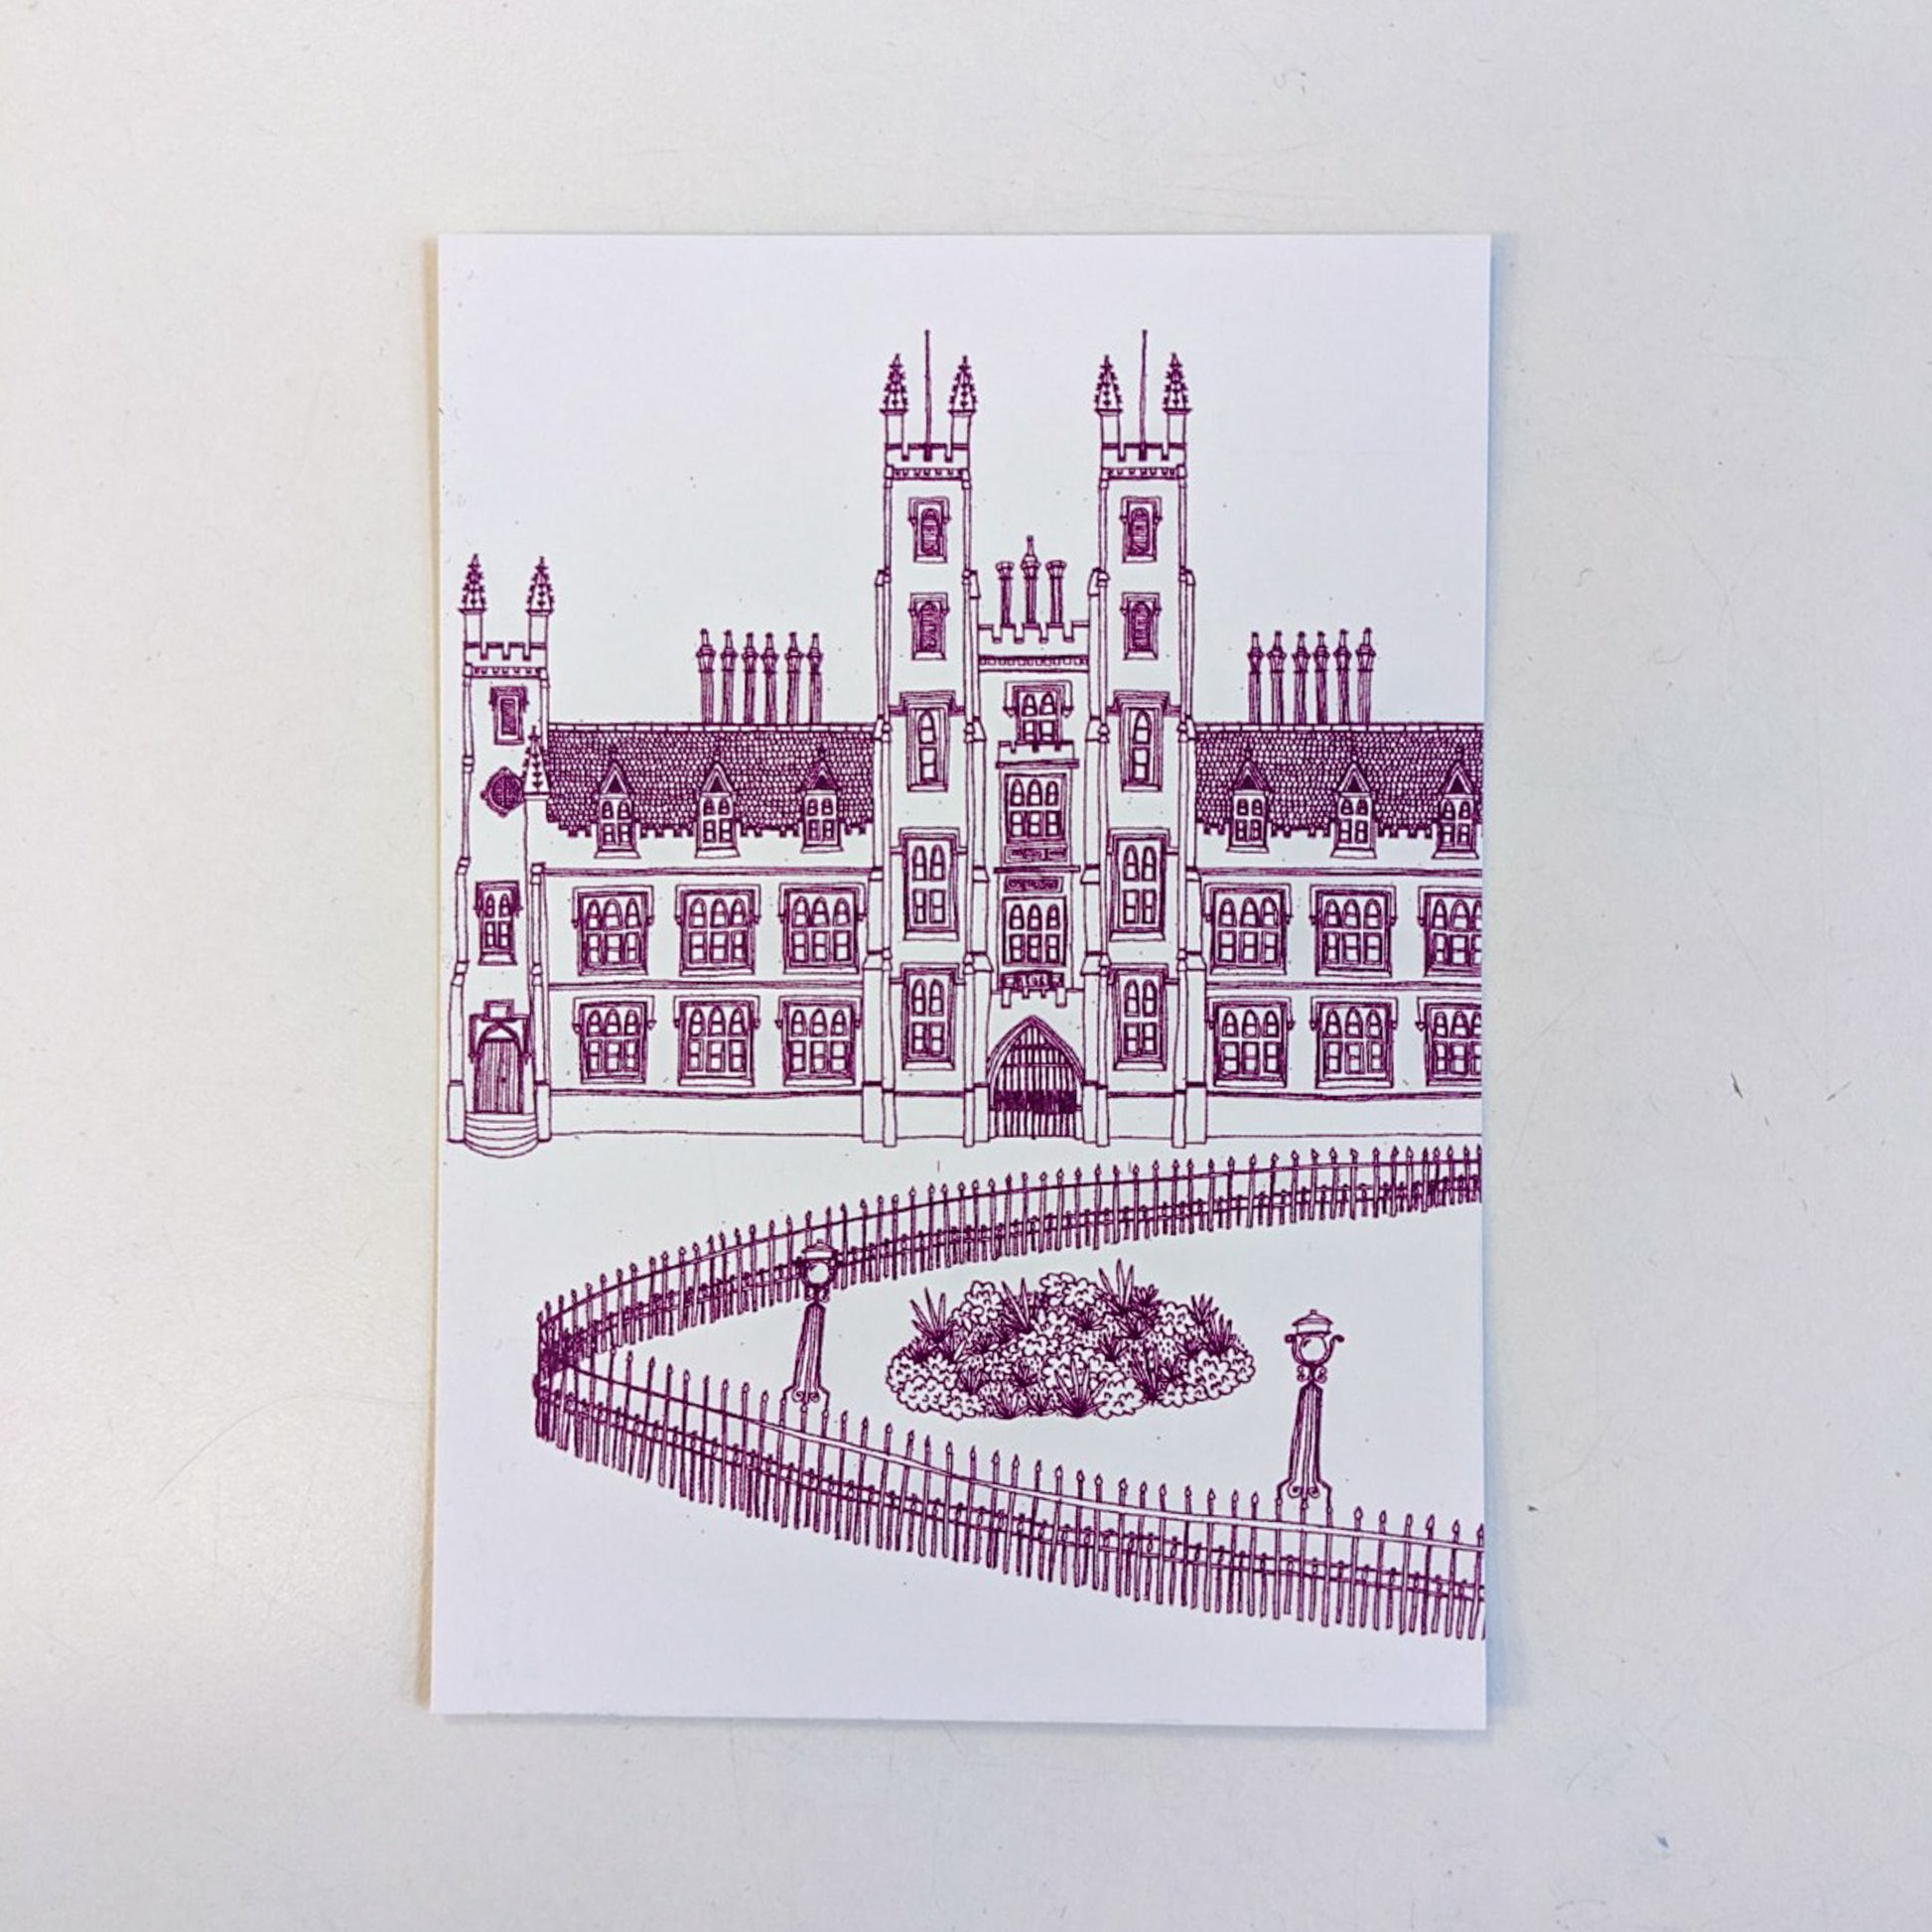 Illustrated image of New College by Victoria Rose Ball. The lines are maroon, set on a white background. The postcard is also set on a white background.